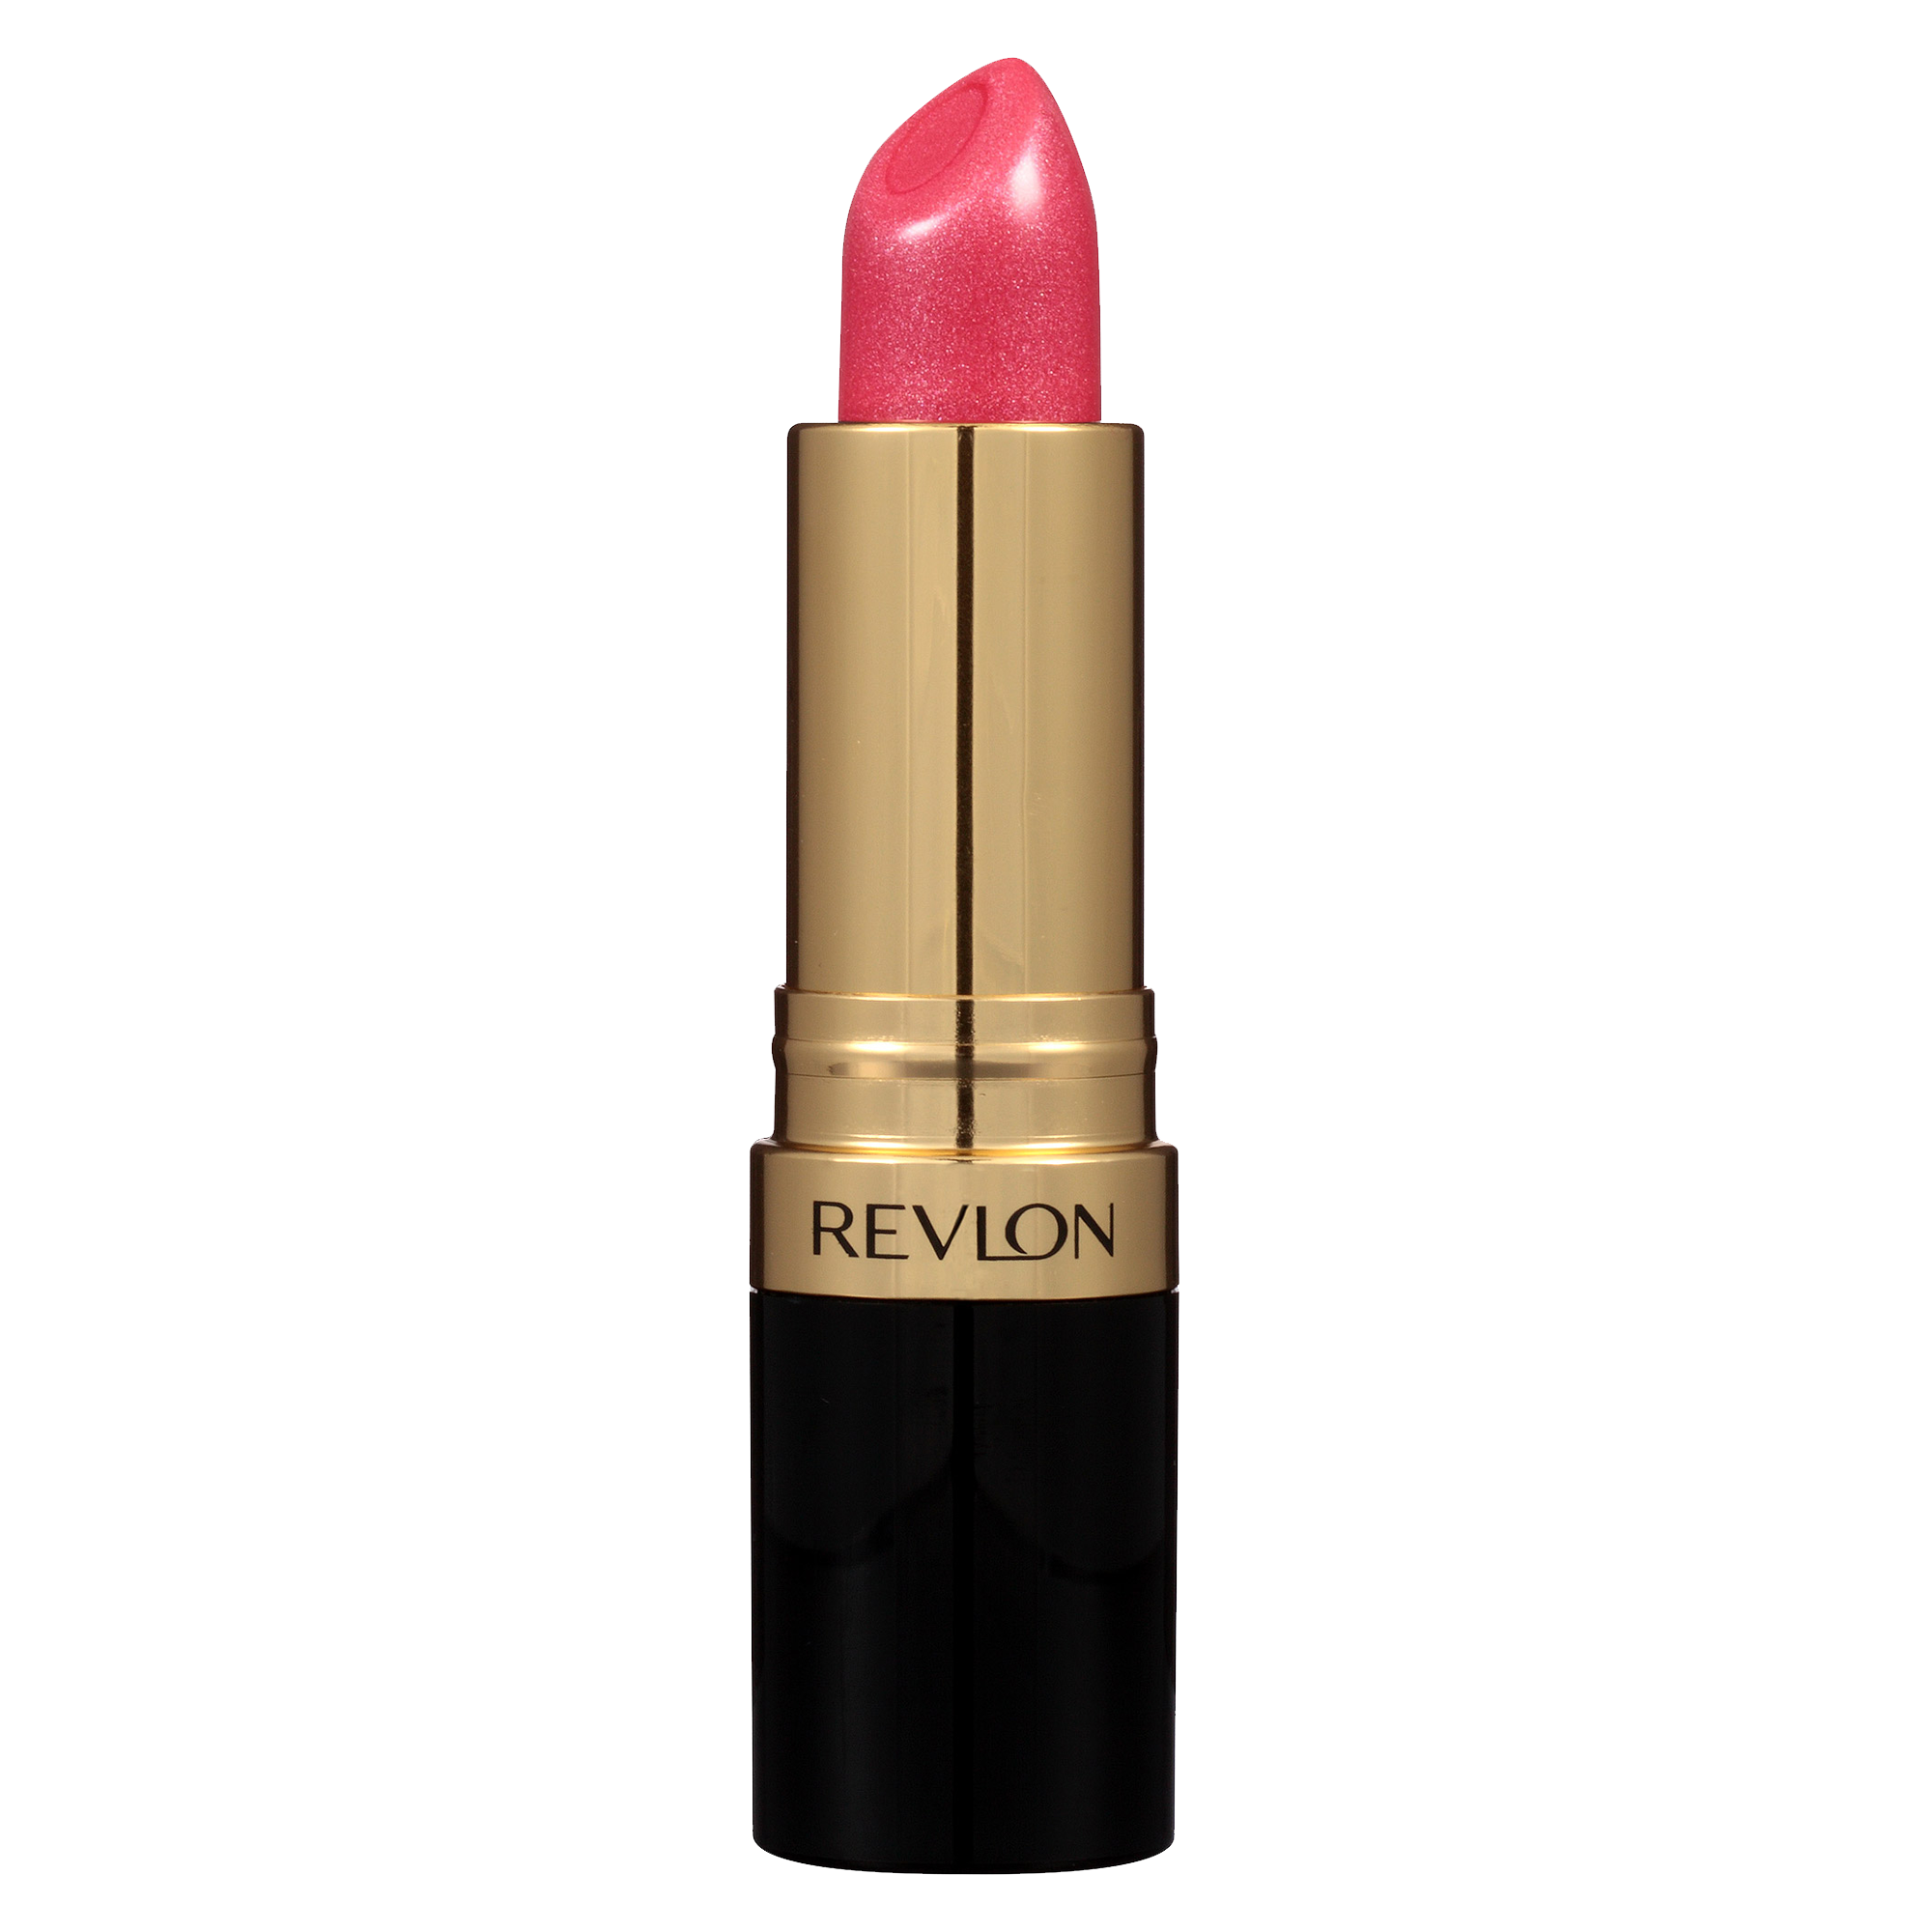 A Pink Lipstick In A Gold Tube